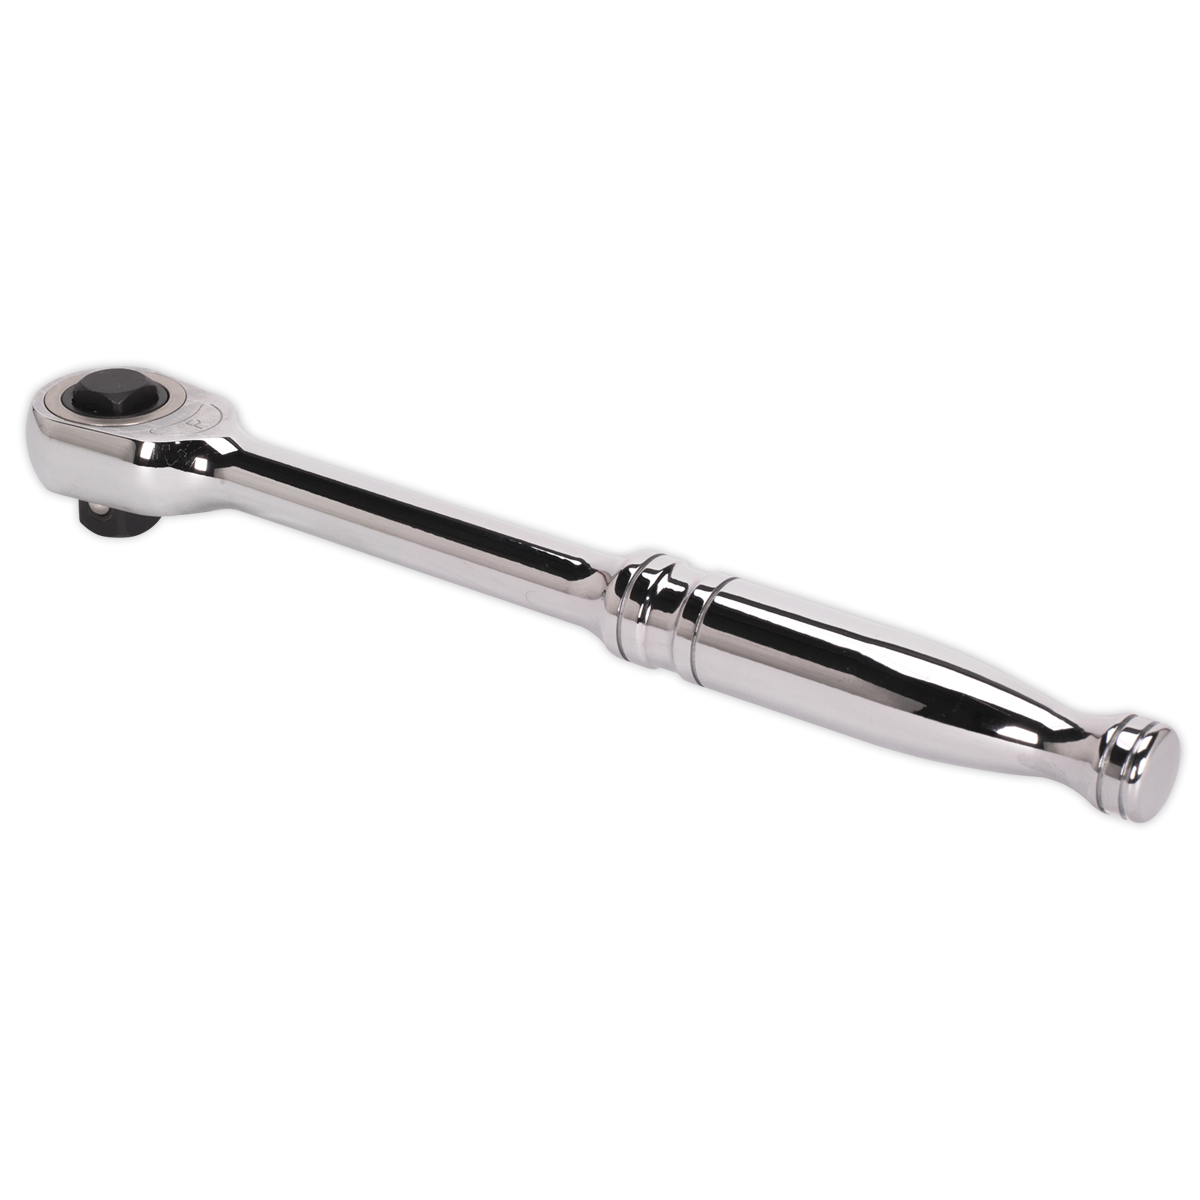 Sealey Gearless Ratchet Wrench 1/2"Sq Drive - Push-Through Reverse